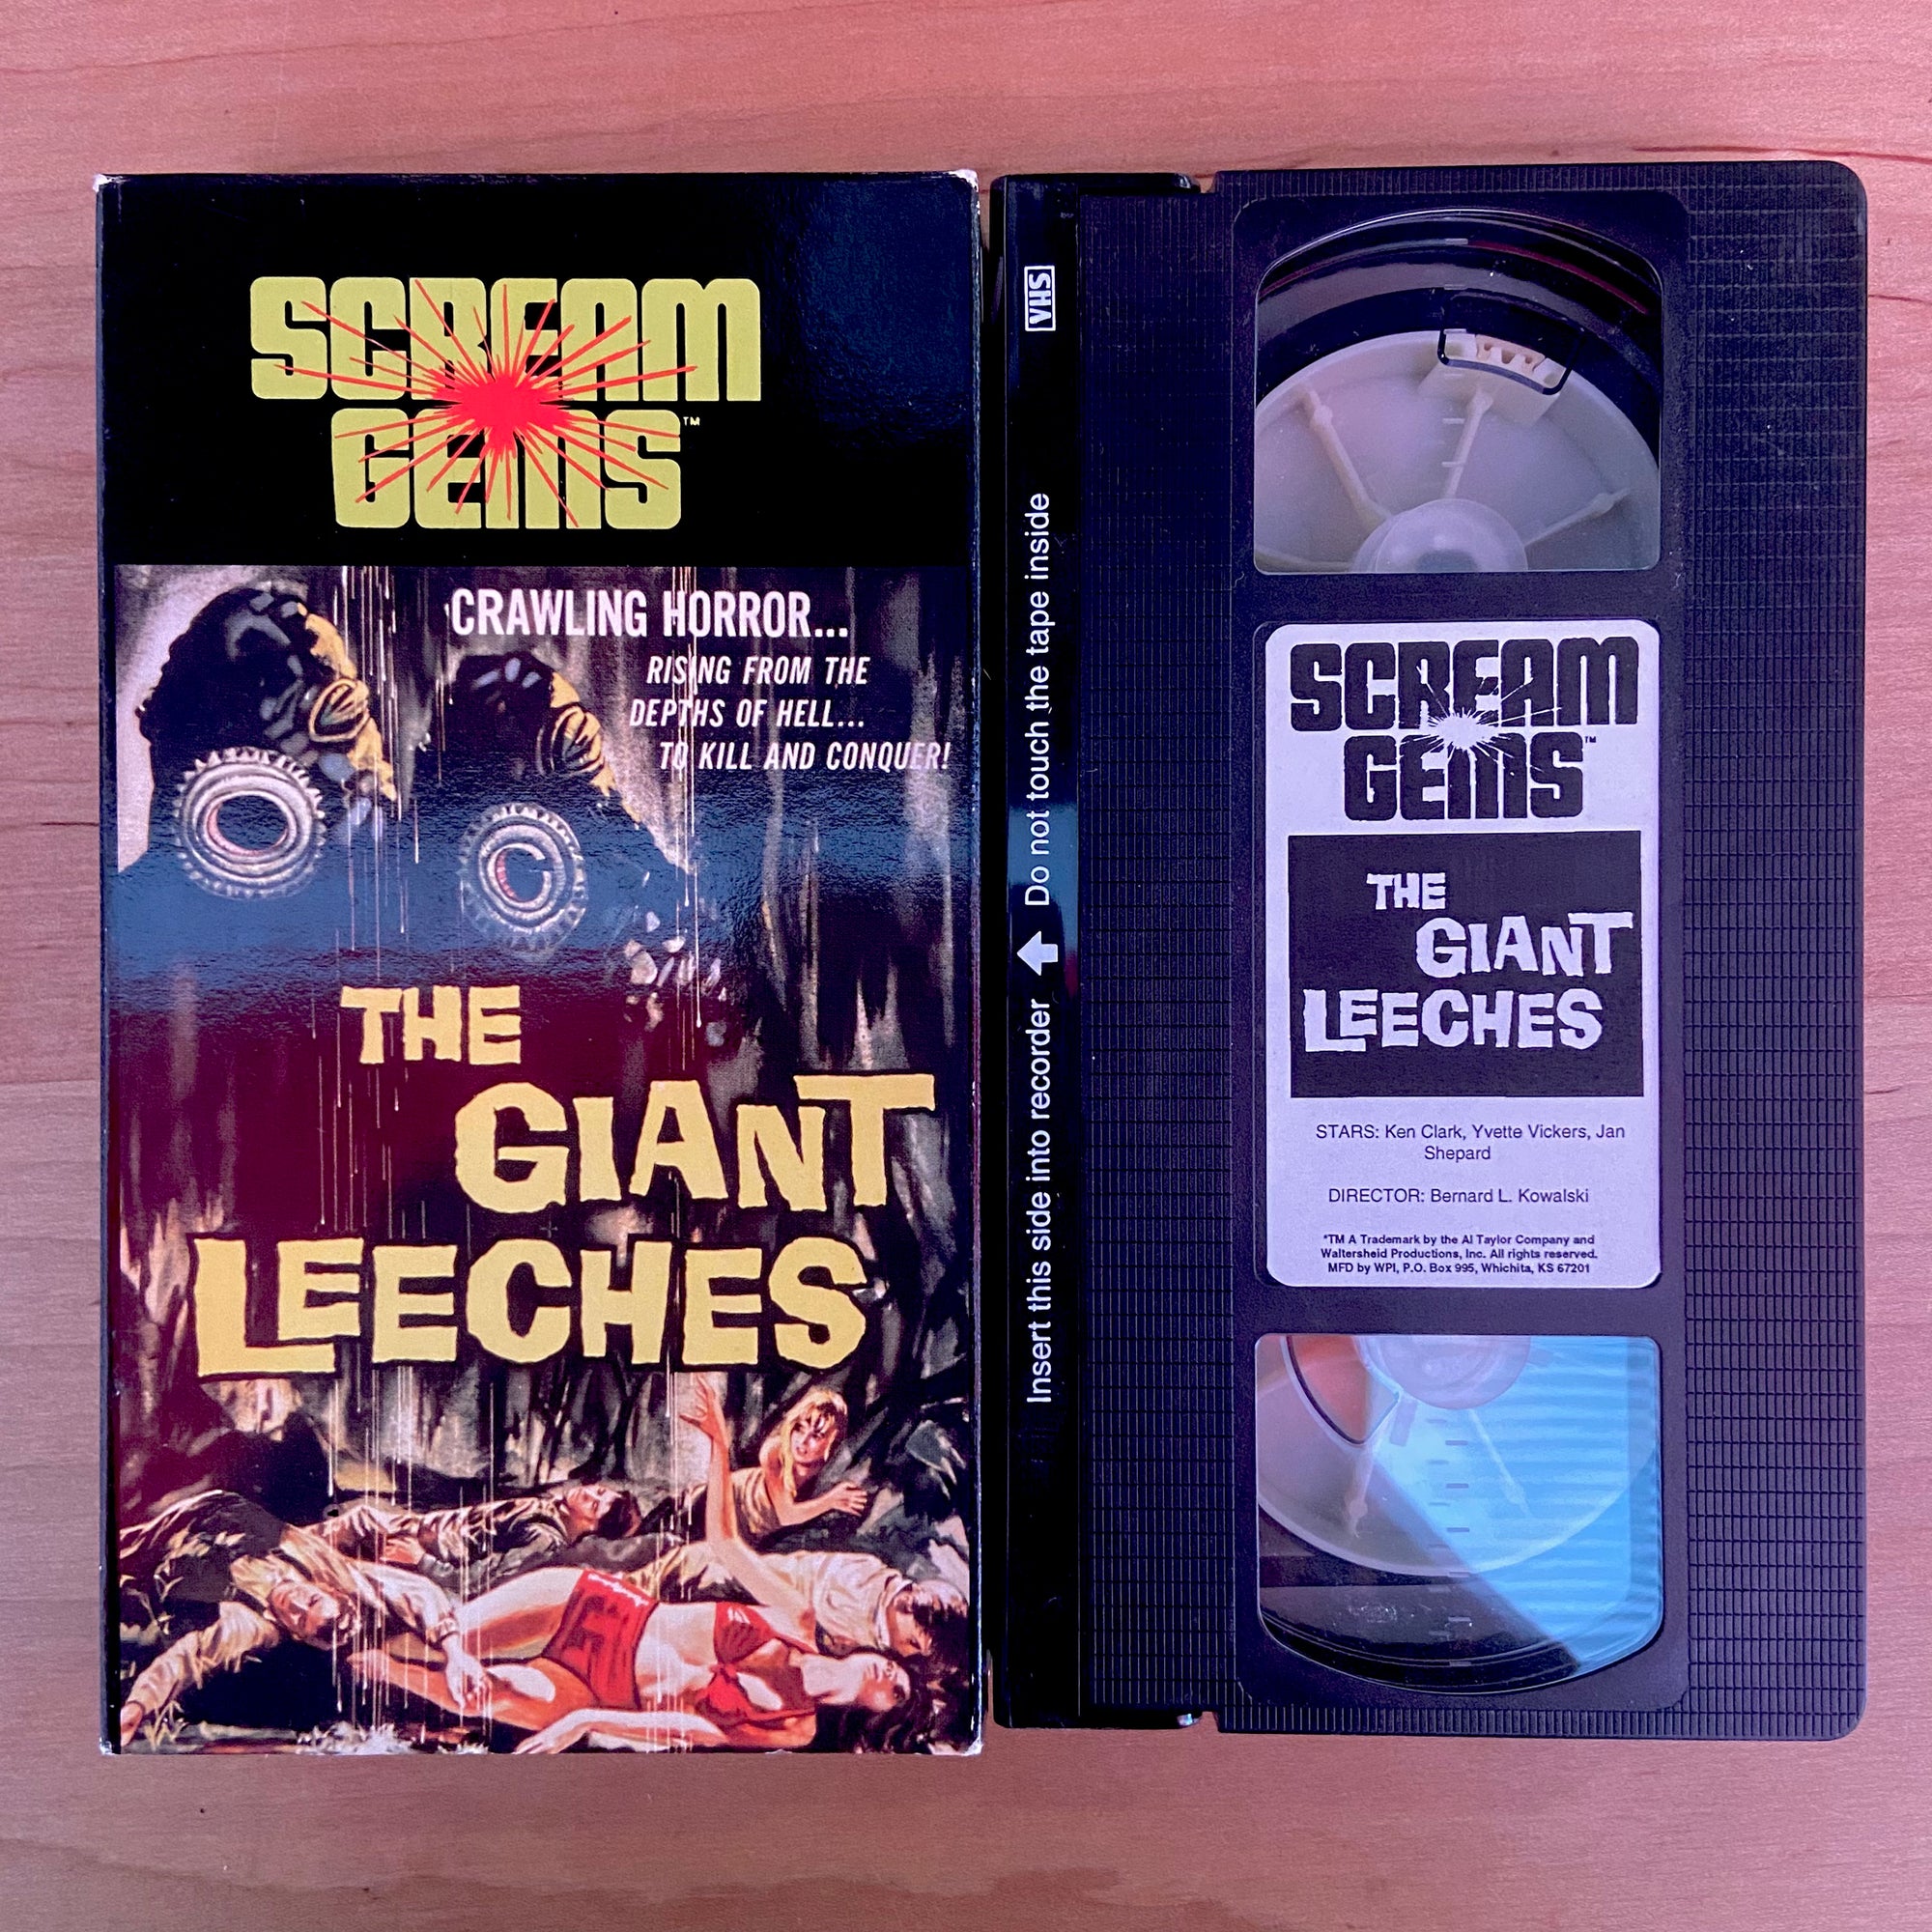 The Giant Leeches - VHS Tape (Used)